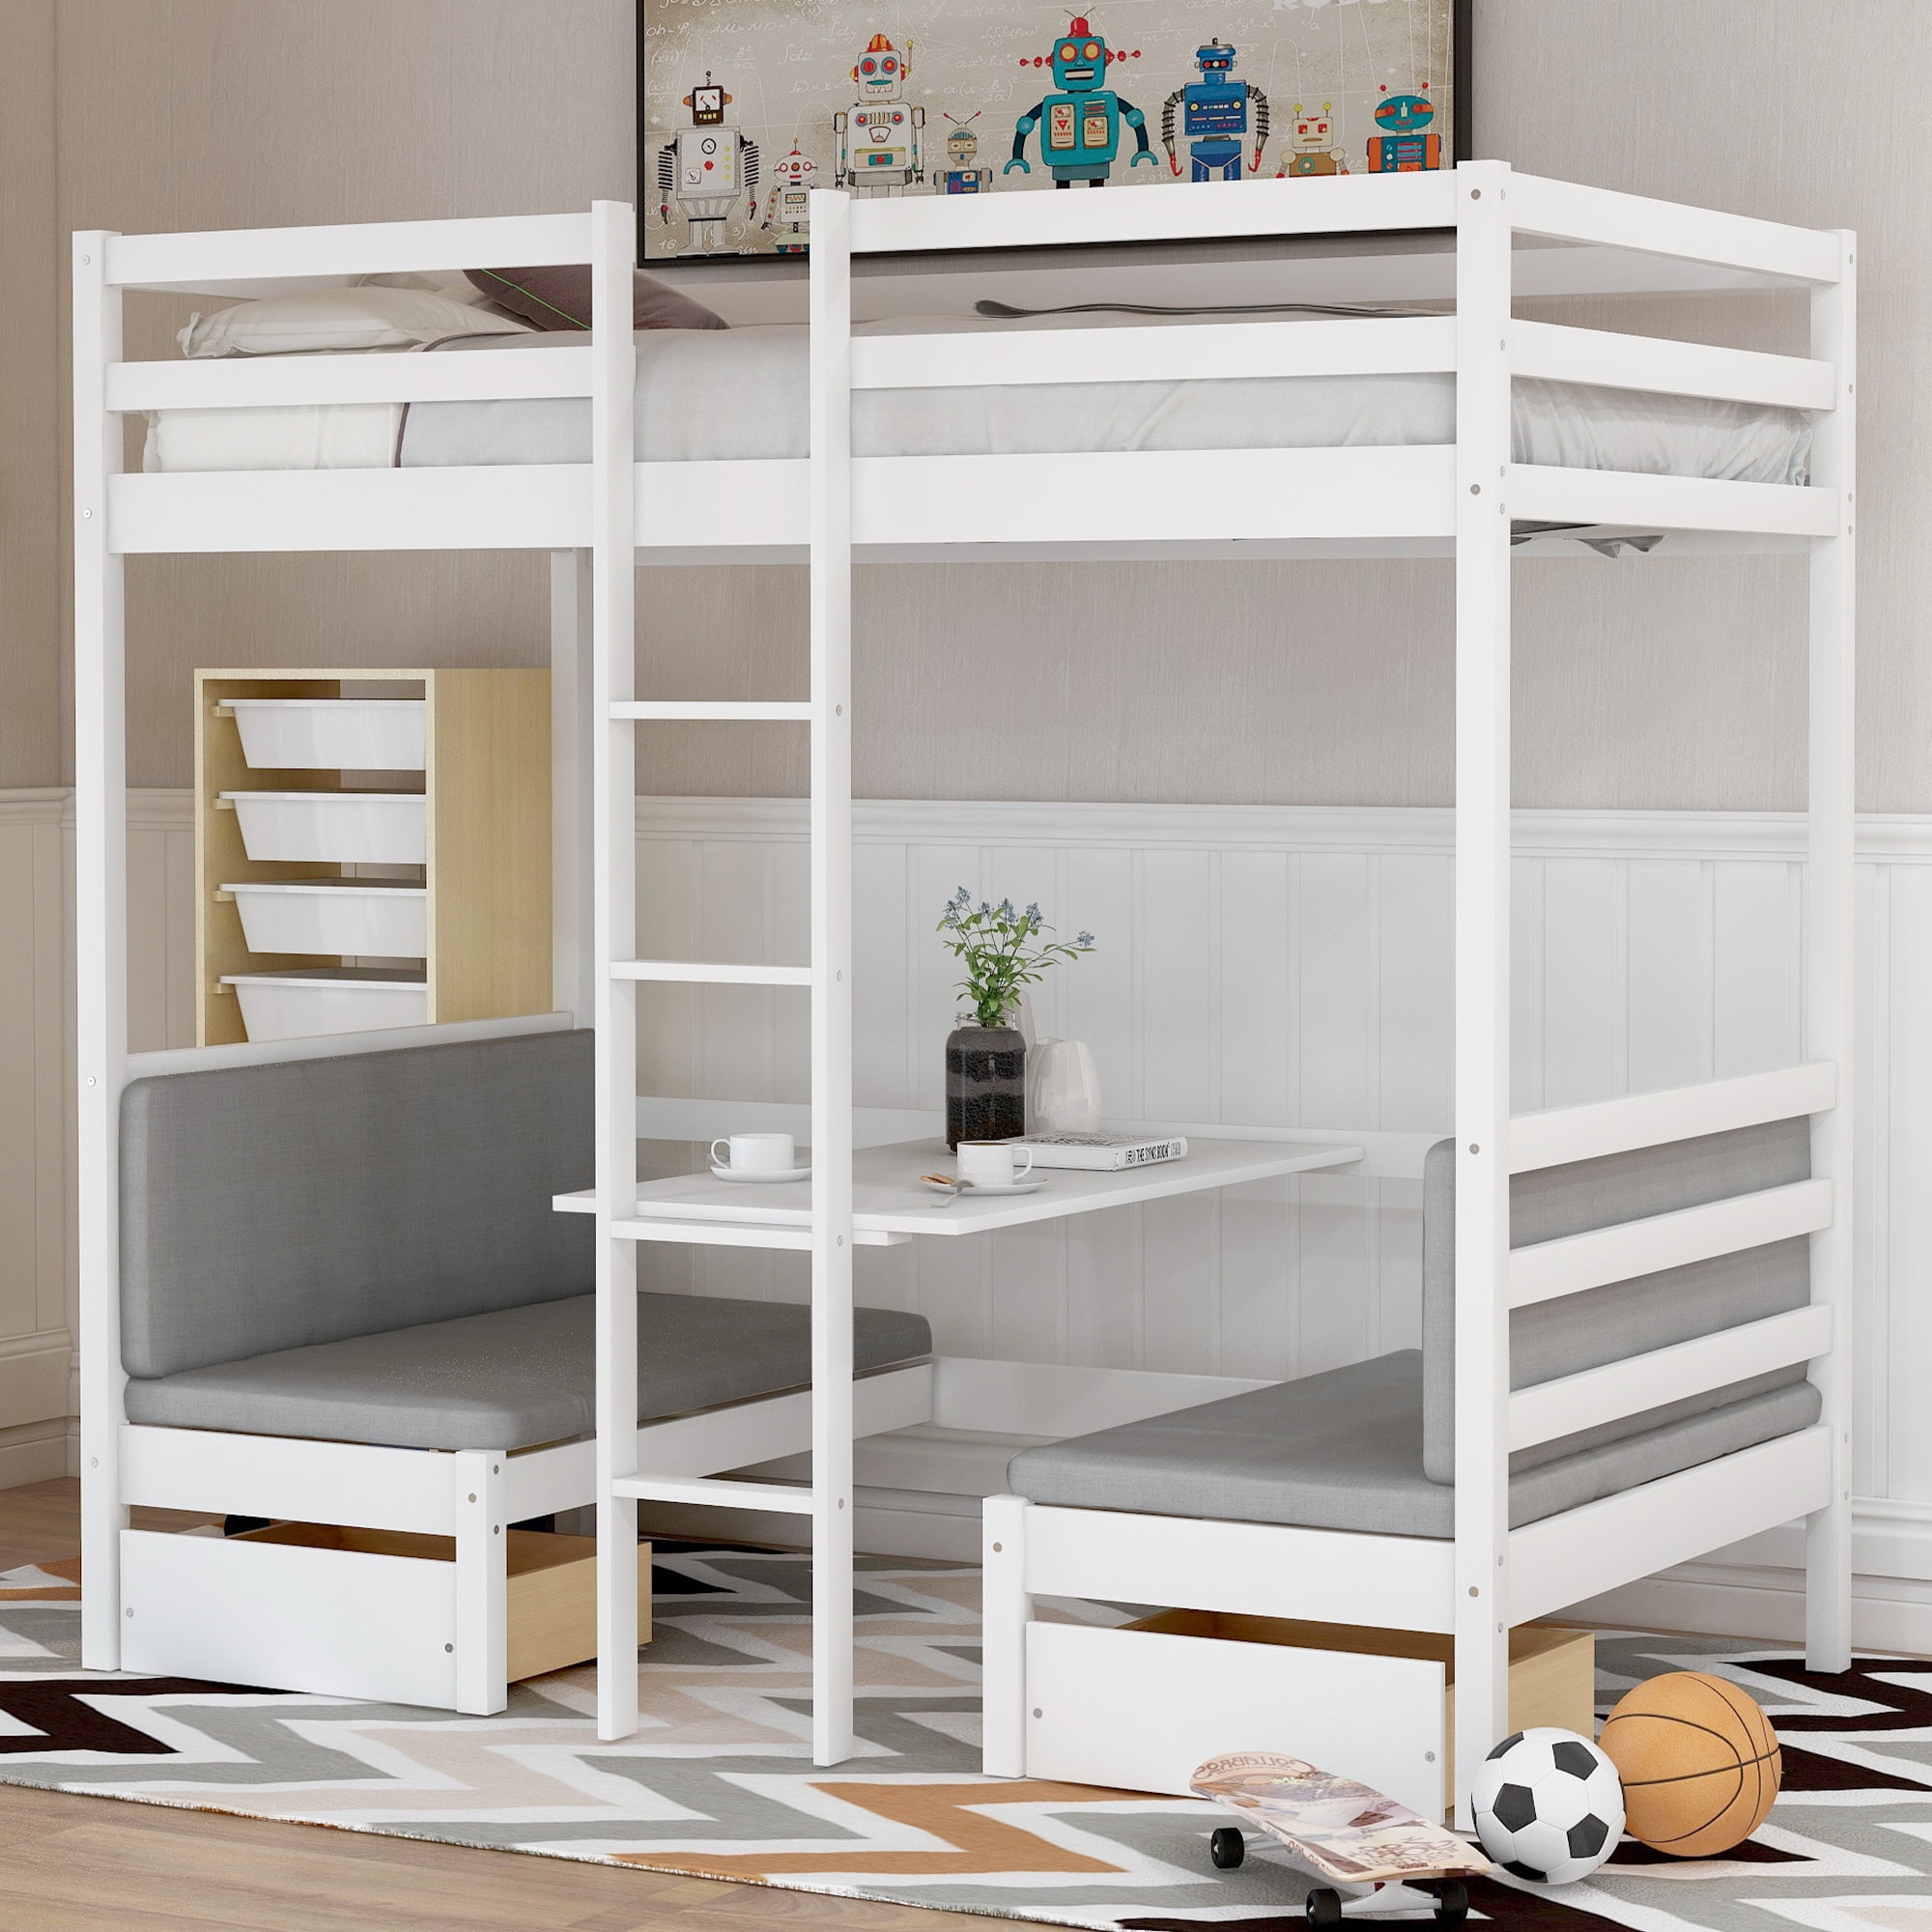 Euroco Solid Wood Convertible Twin Bunk, Bunk Beds With Built In Desk And Drawers